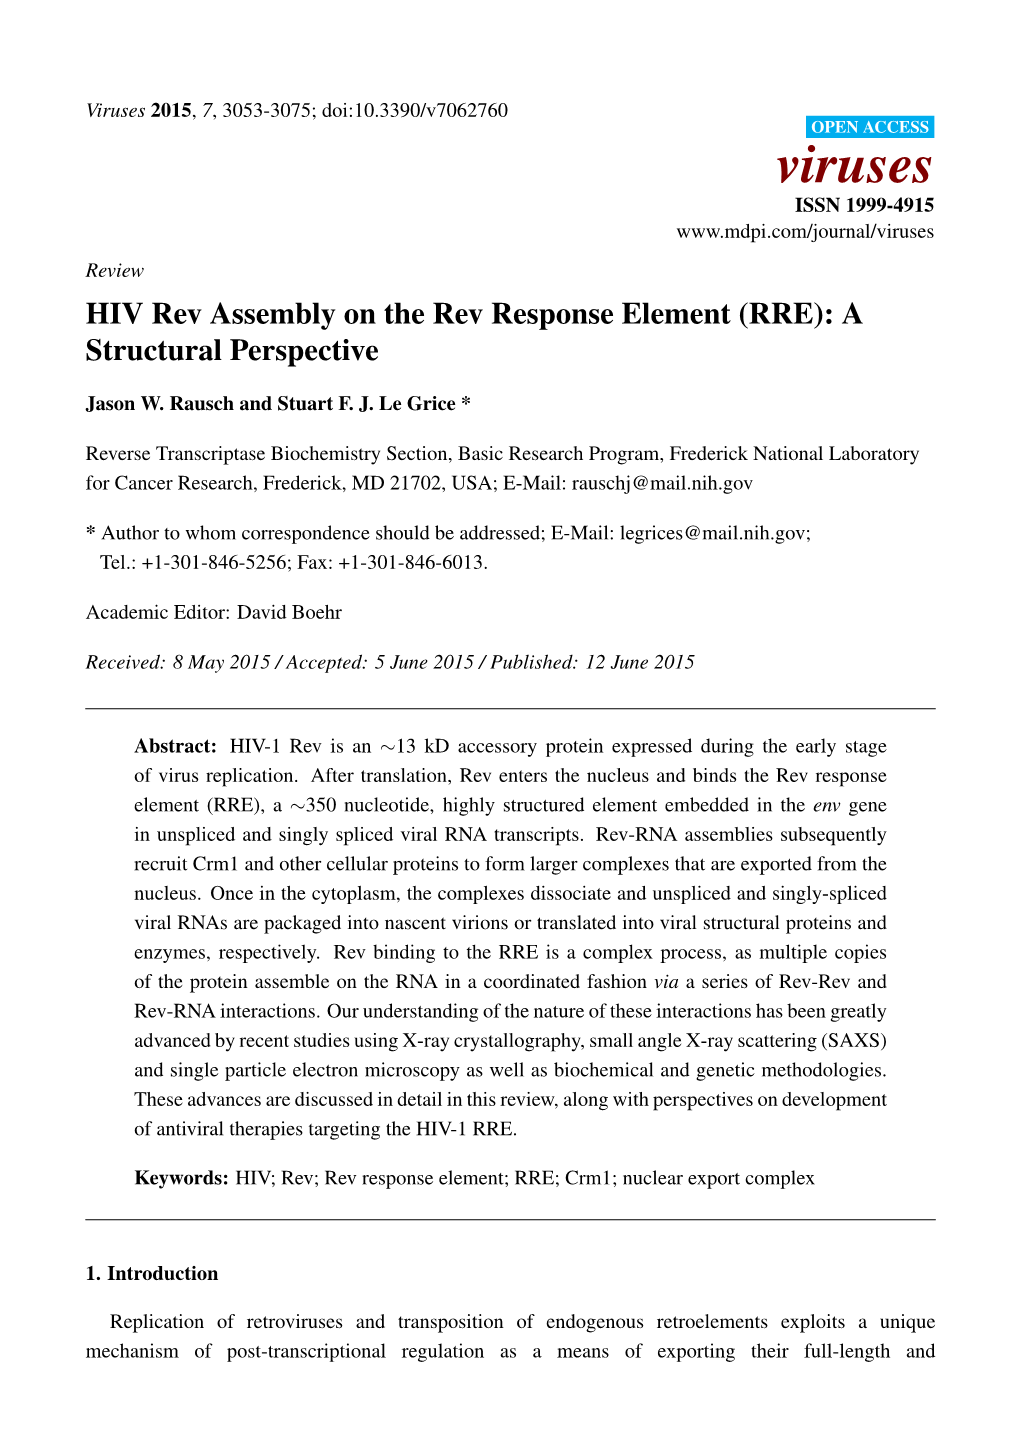 (RRE): a Structural Perspective